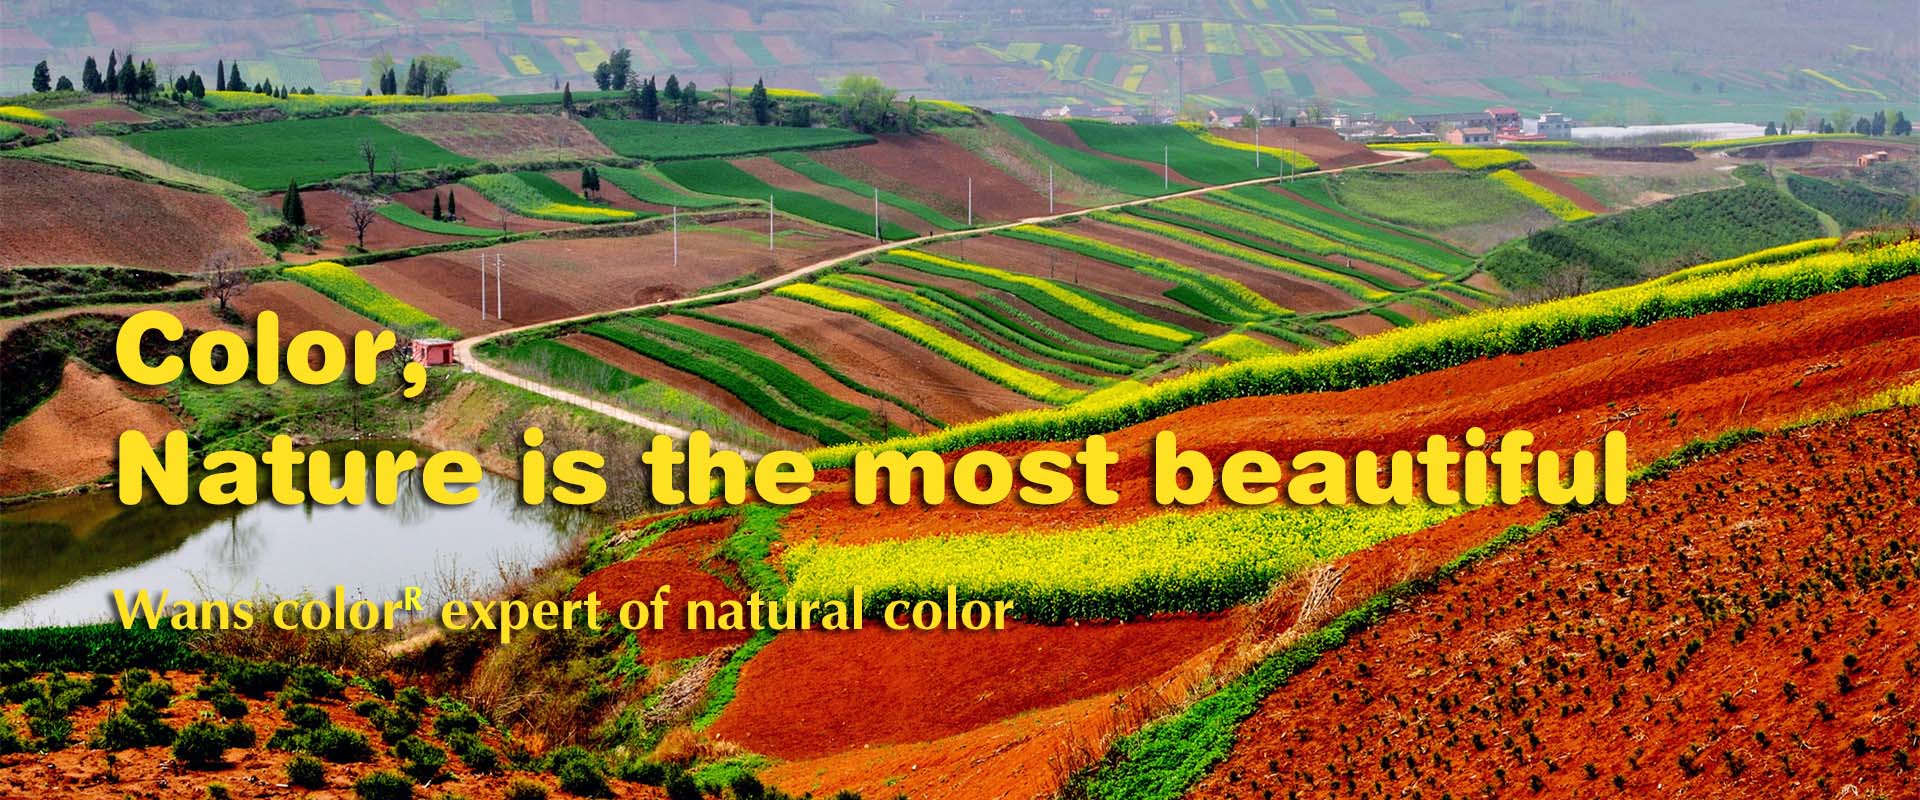 color natural is the best beautiful